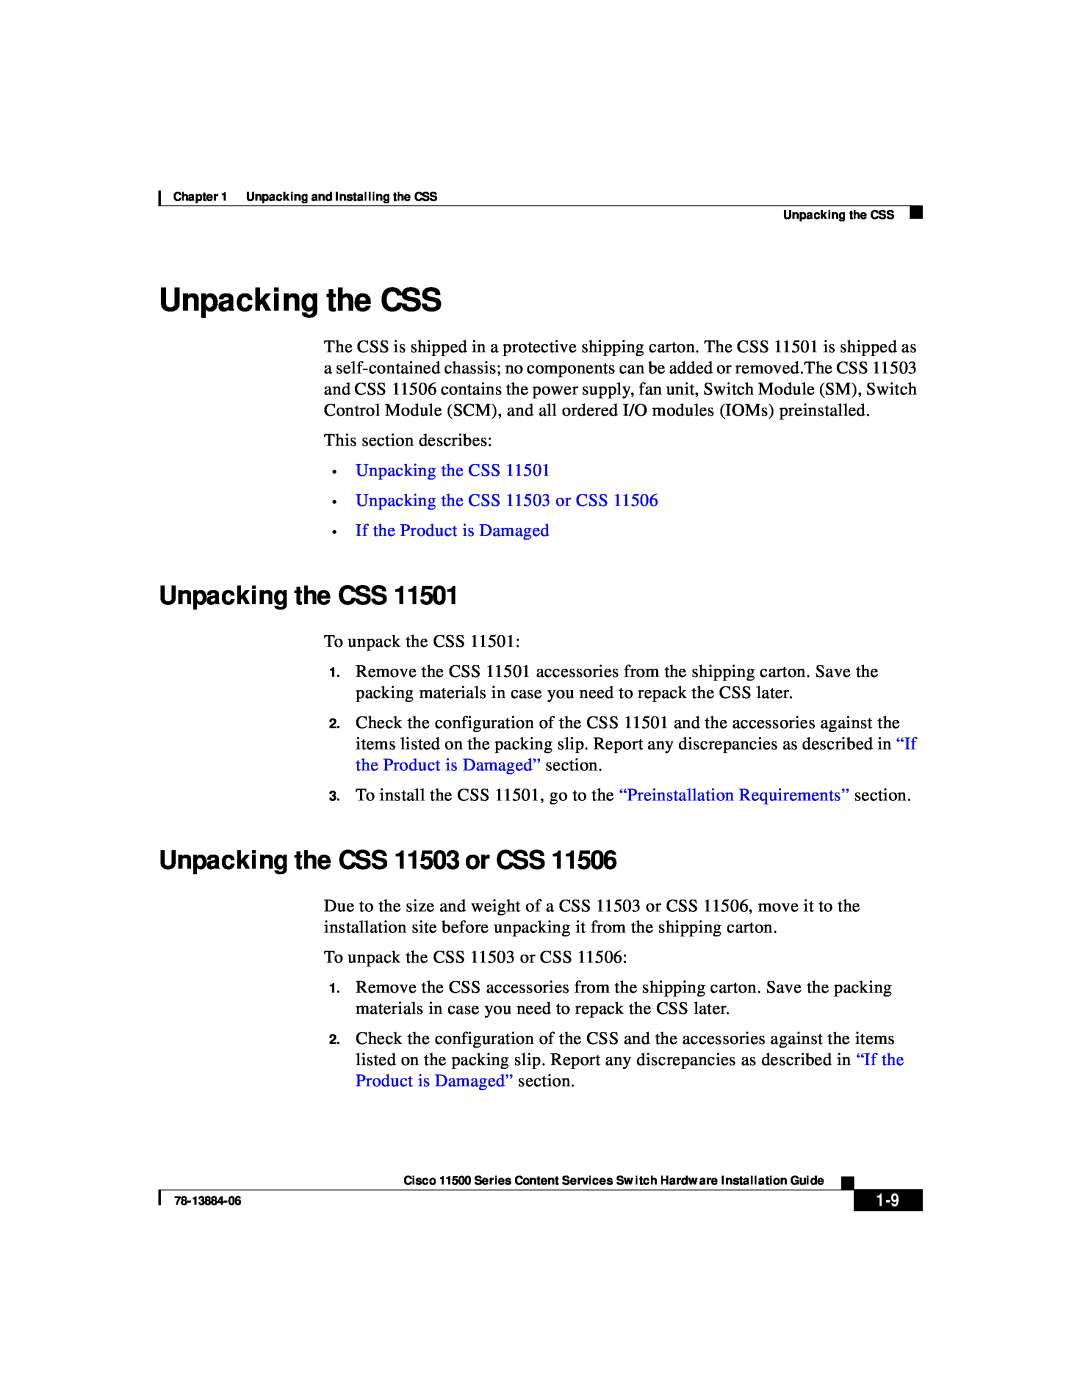 Cisco Systems 11500 Series manual Unpacking the CSS Unpacking the CSS 11503 or CSS, If the Product is Damaged 